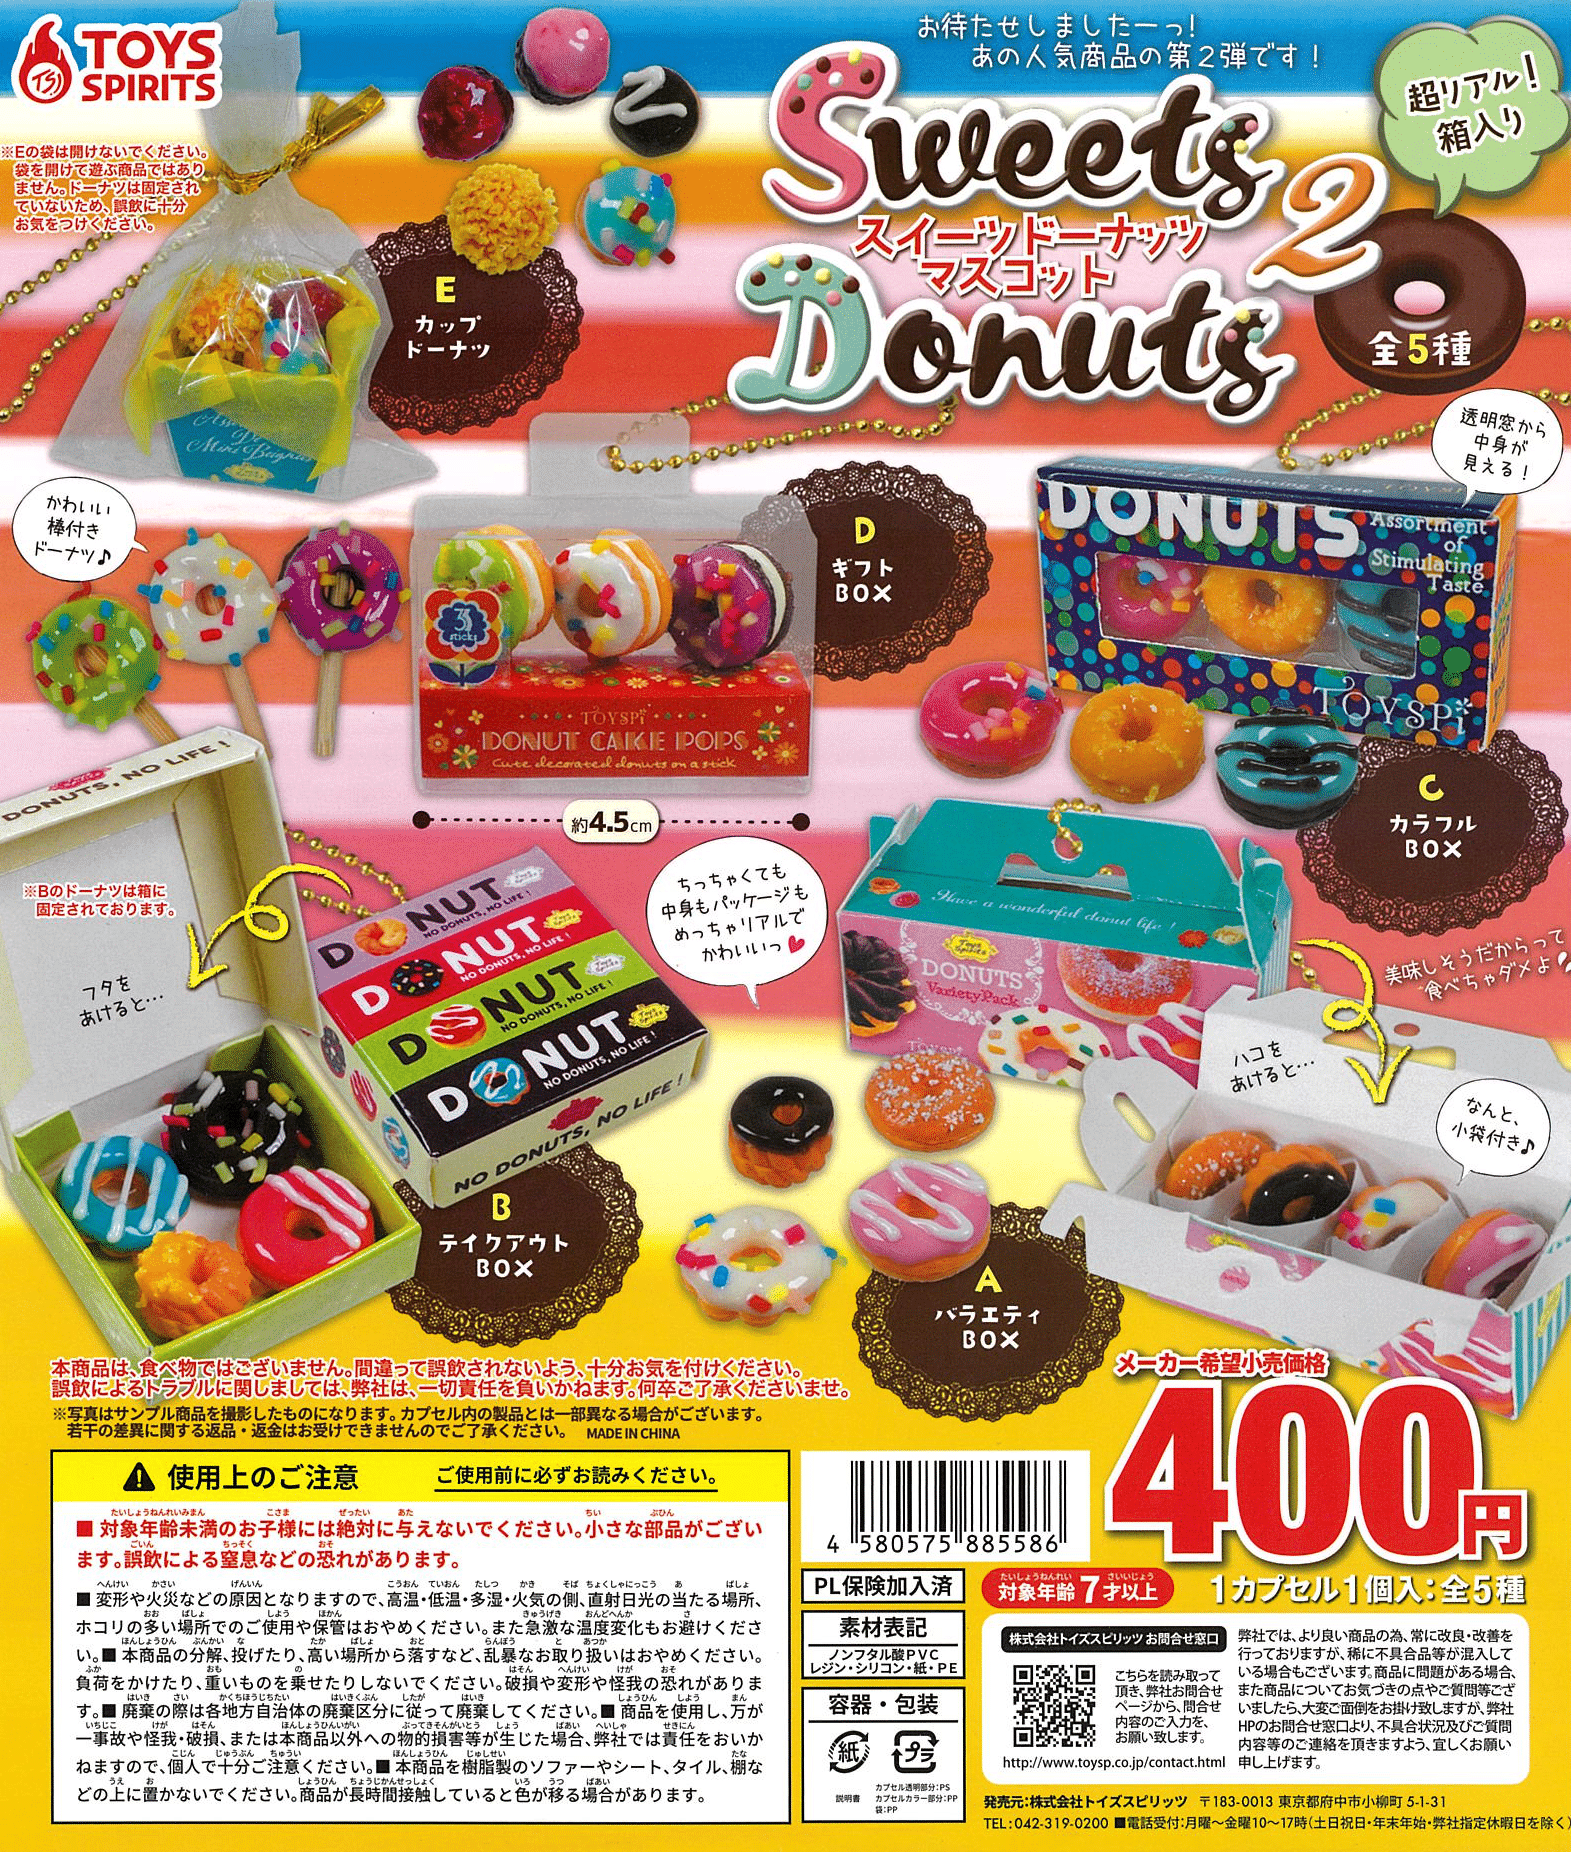 CP2656 Super realistic ! Boxed Sweets Donut Mascot 2